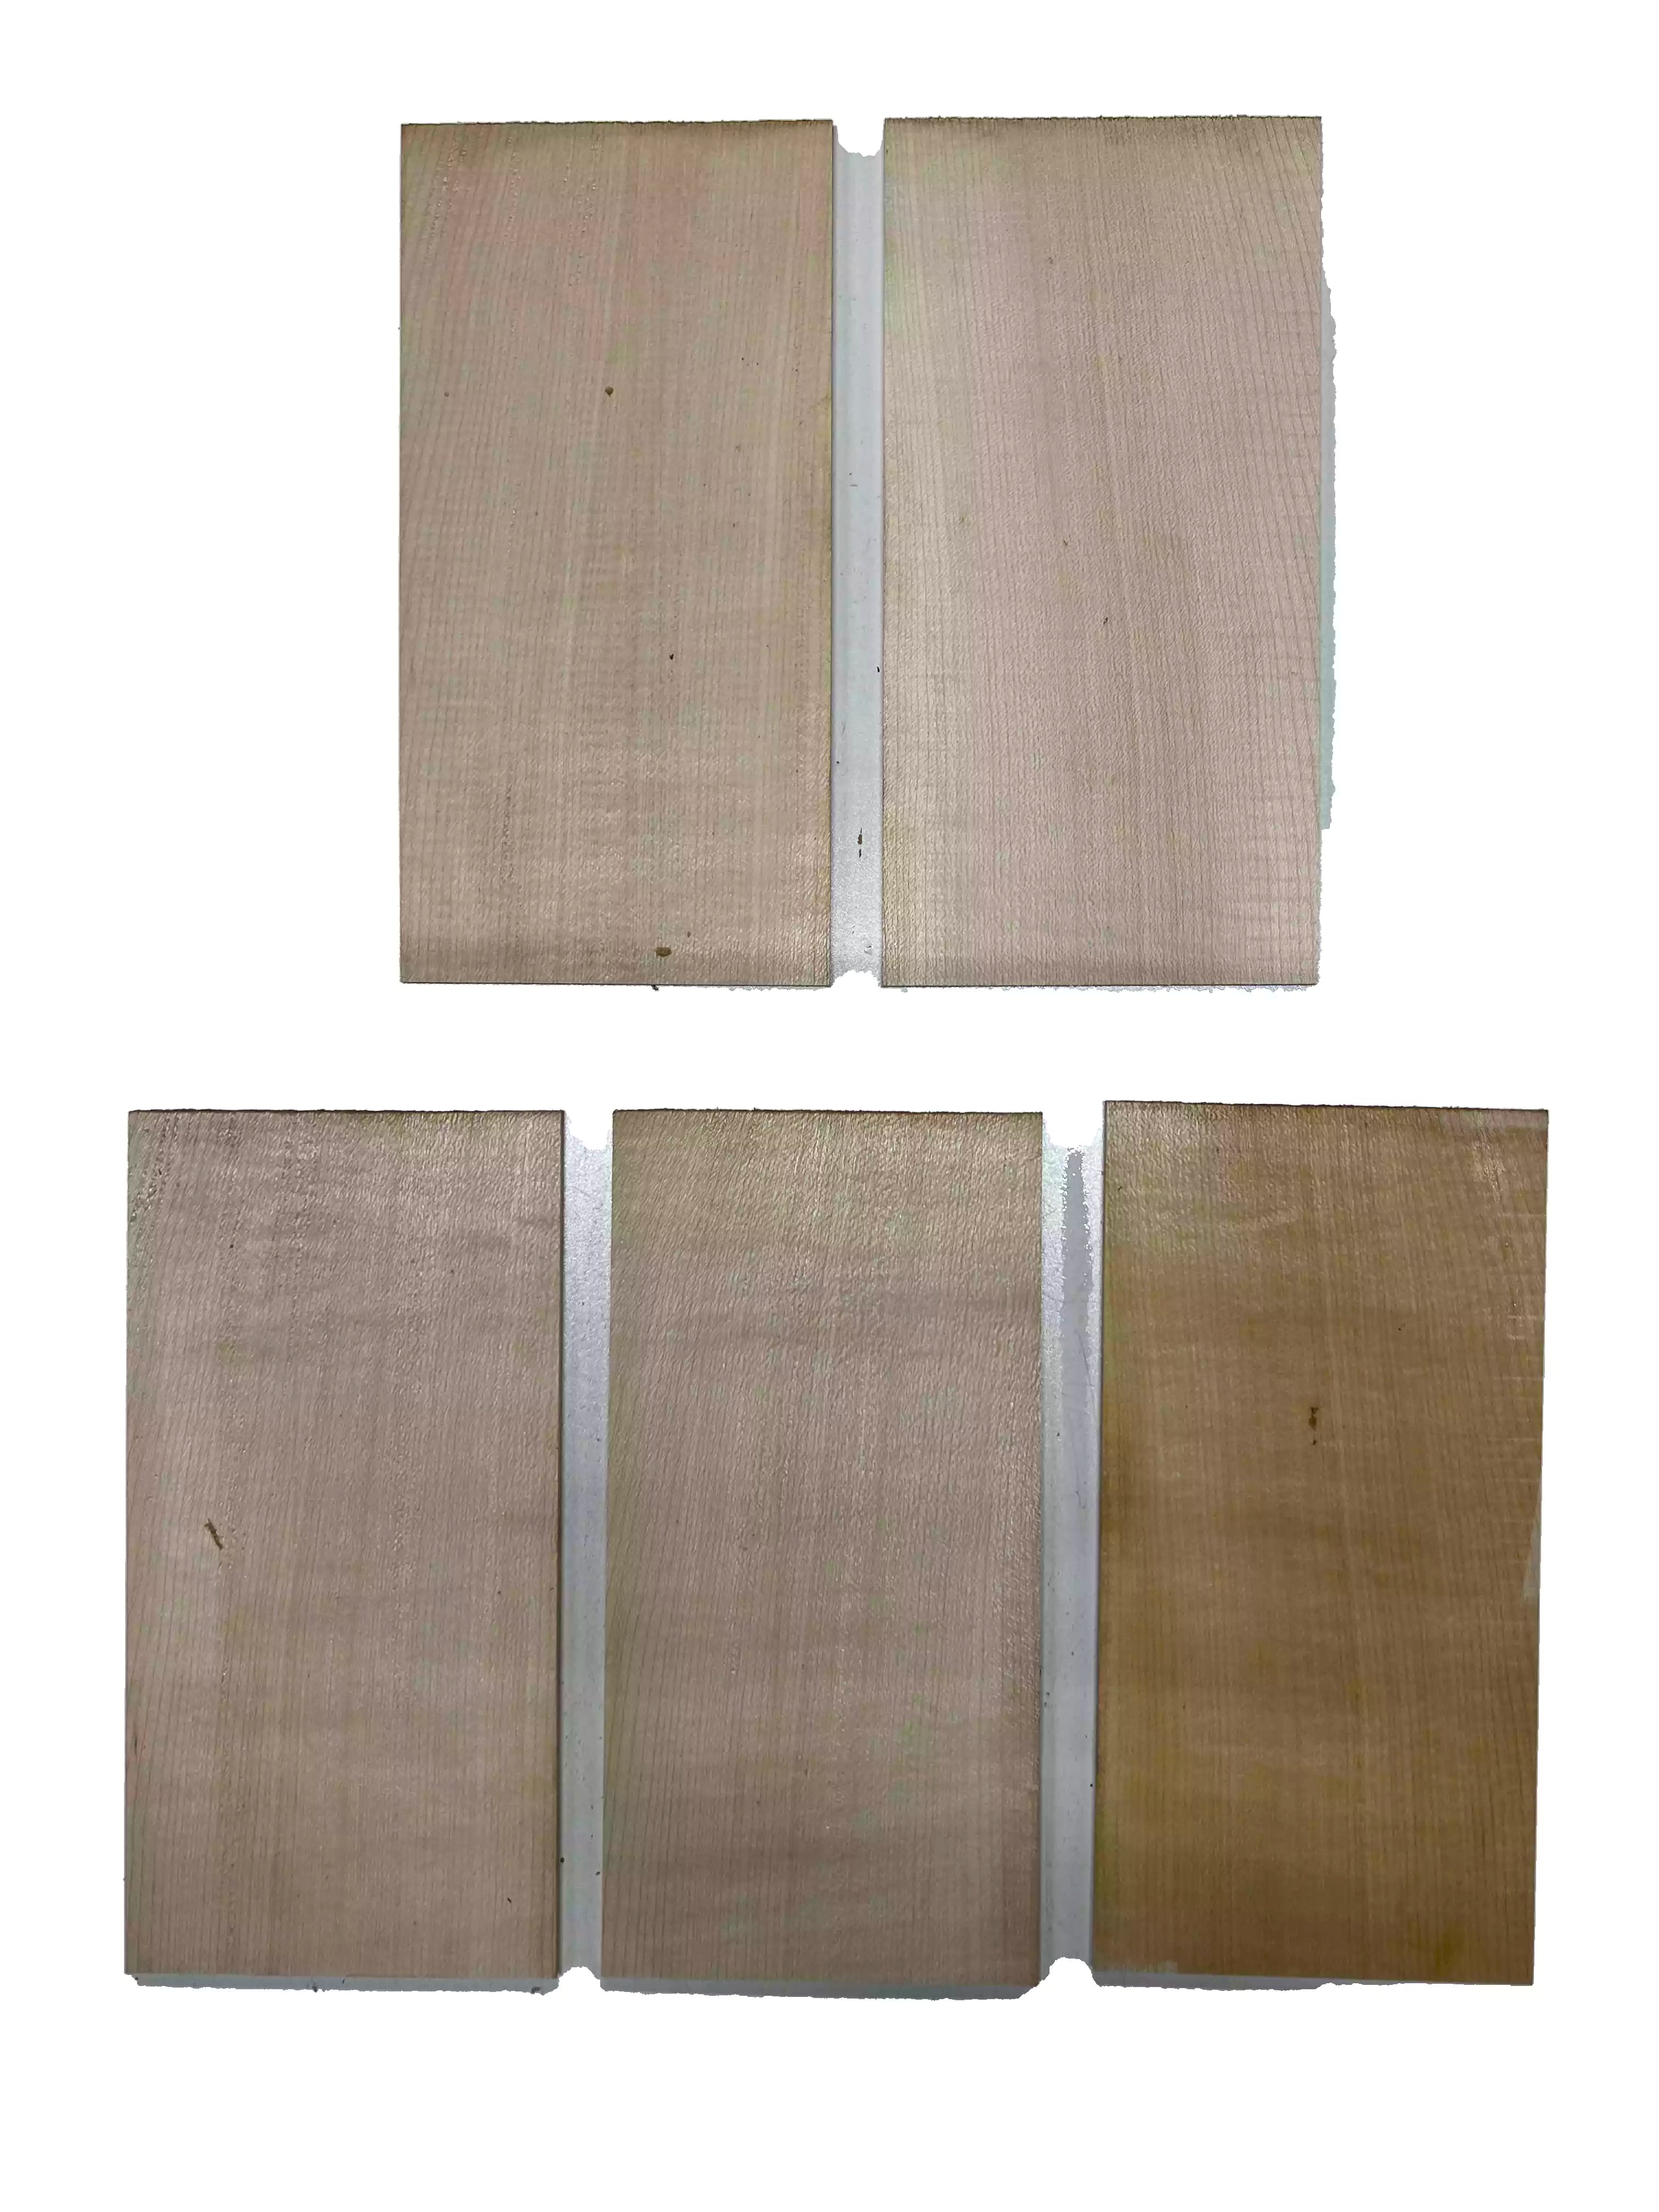 Pack of 5, Hard Maple Guitar Wood Head Plate Blanks Luthier Tonewood 8&quot;x4&quot;x1/8&quot; 